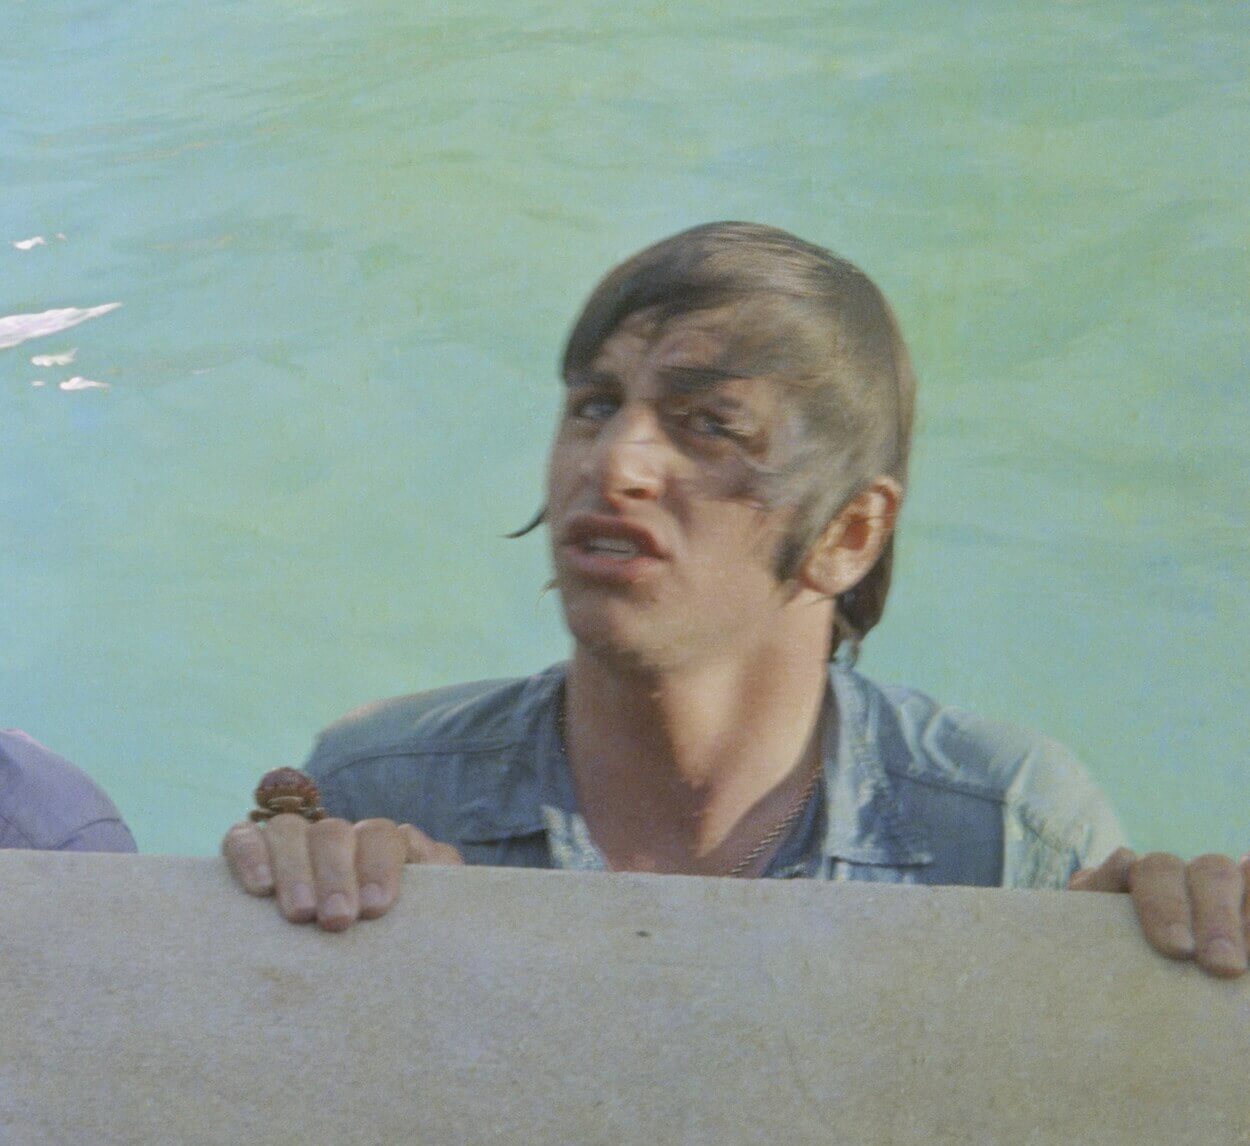 A Ringo Starr climbing out of a swimming pool while filming The Beatles' movie 'Help!' in the Bahamas in 1965.